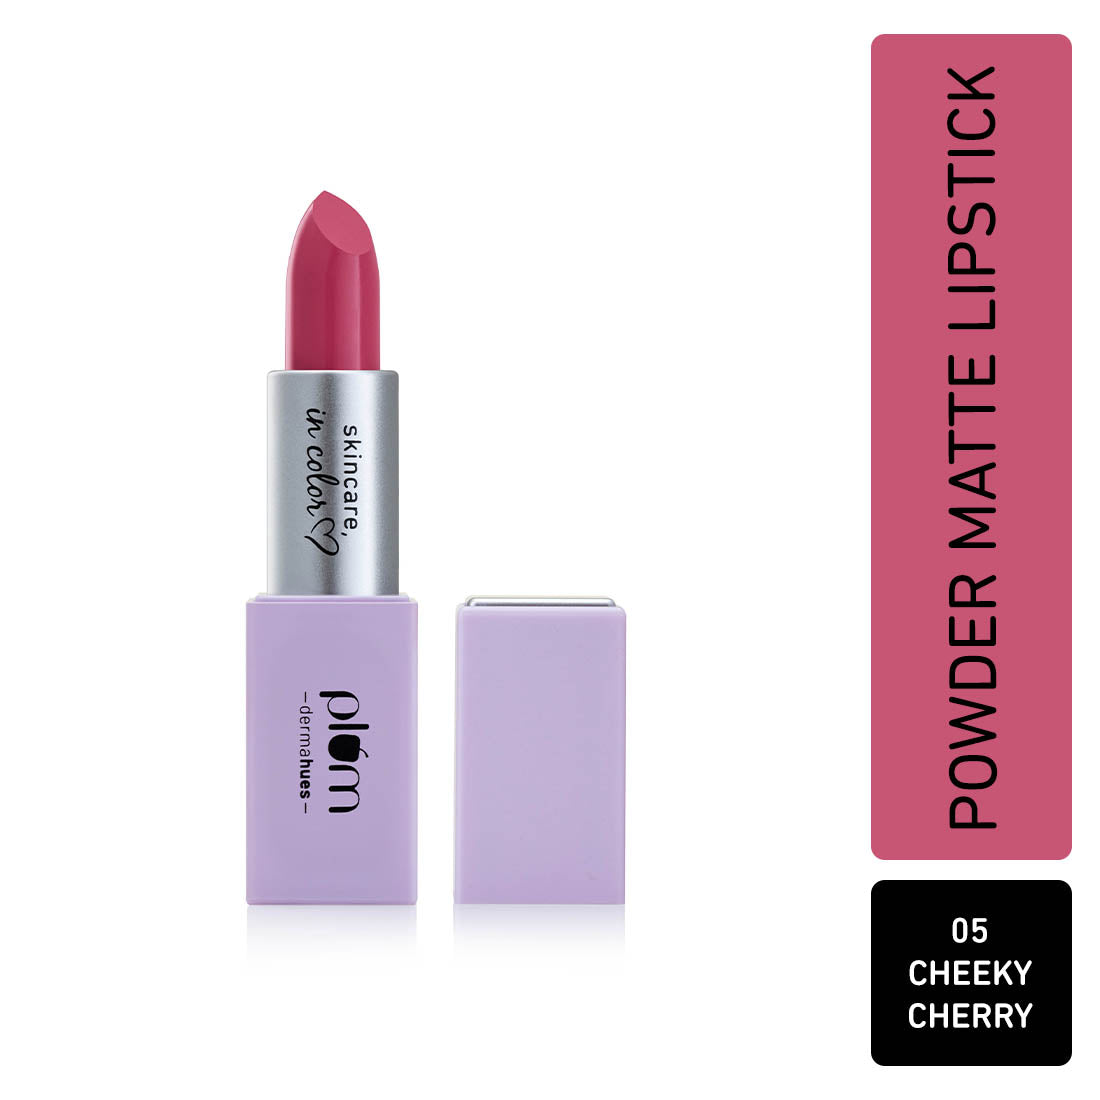 

Plum Velvet Haze Matte Lipstick with SPF 30 | Powder Matte Finish | Highly Pigmented | With Ceramides | 01 Nifty Nude, 05 Cheeky Cherry